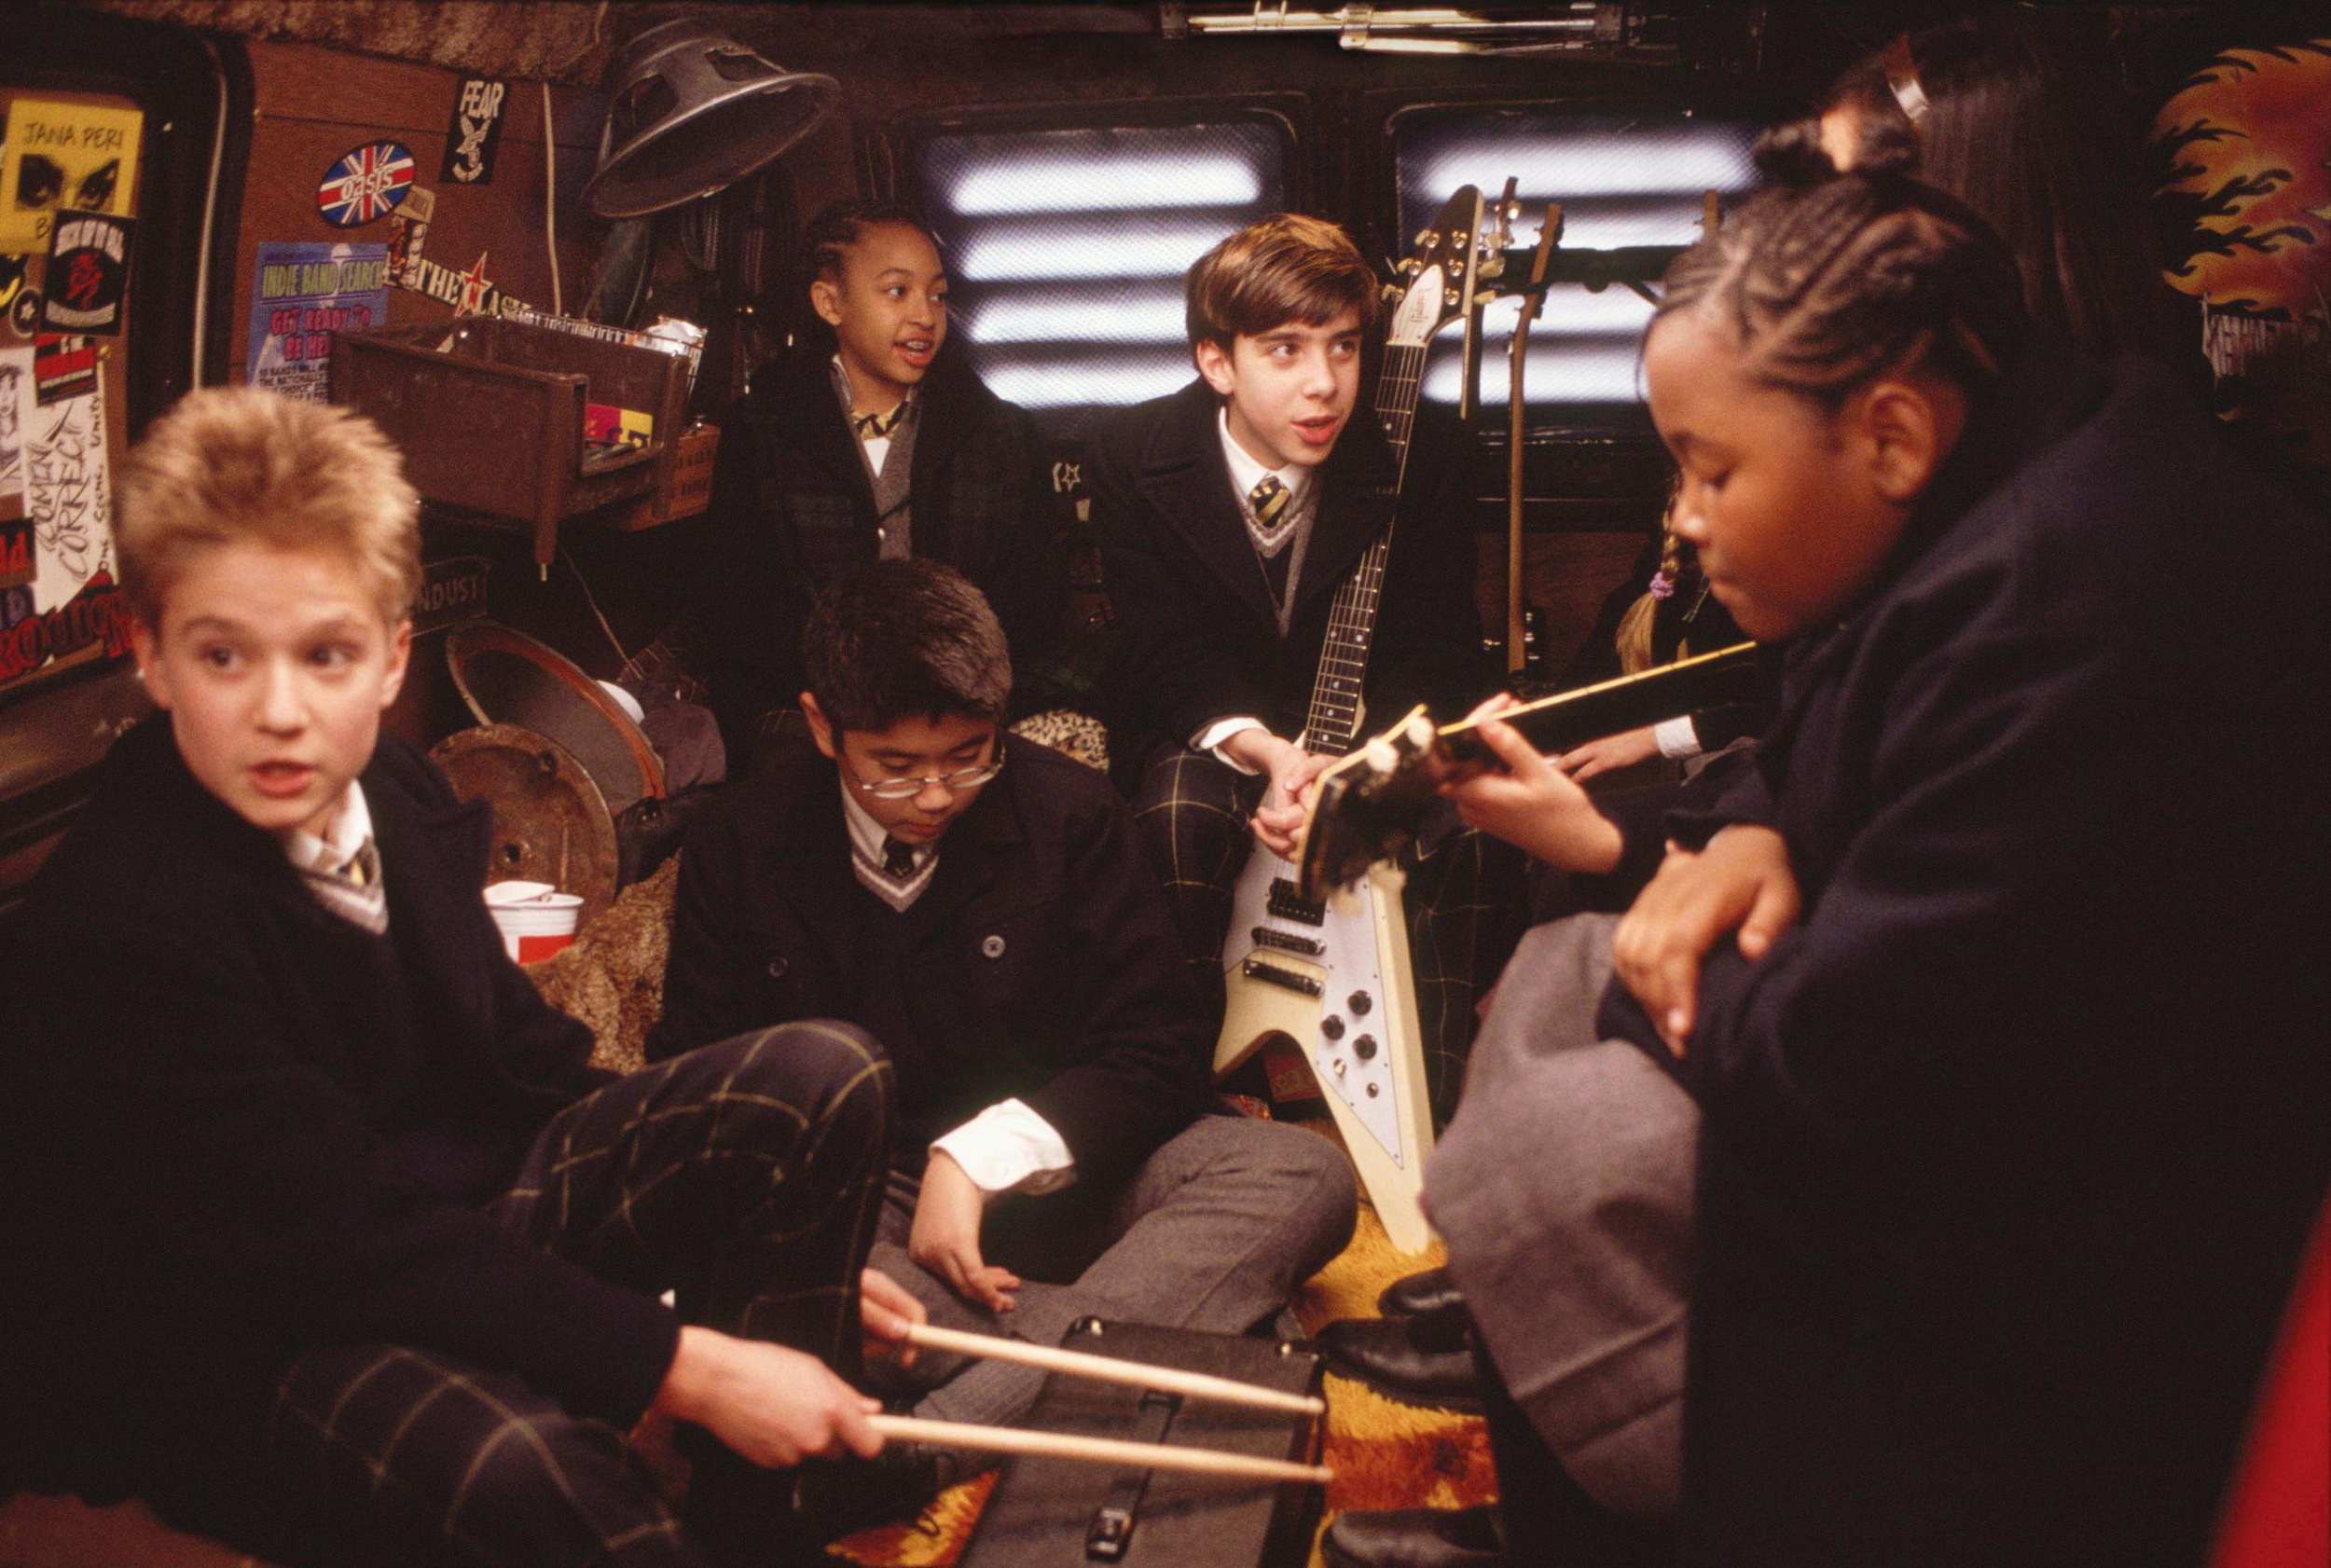 <p>Nickelodeon adapted <em>School of Rock</em> into a TV show several years after the movie came out. The TV version focused more on the kids, unsurprisingly, and ran for three seasons from 2016 through 2018.</p><p><a href='https://www.msn.com/en-us/community/channel/vid-cj9pqbr0vn9in2b6ddcd8sfgpfq6x6utp44fssrv6mc2gtybw0us'>Did you enjoy this slideshow? Follow us on MSN to see more of our exclusive entertainment content.</a></p>